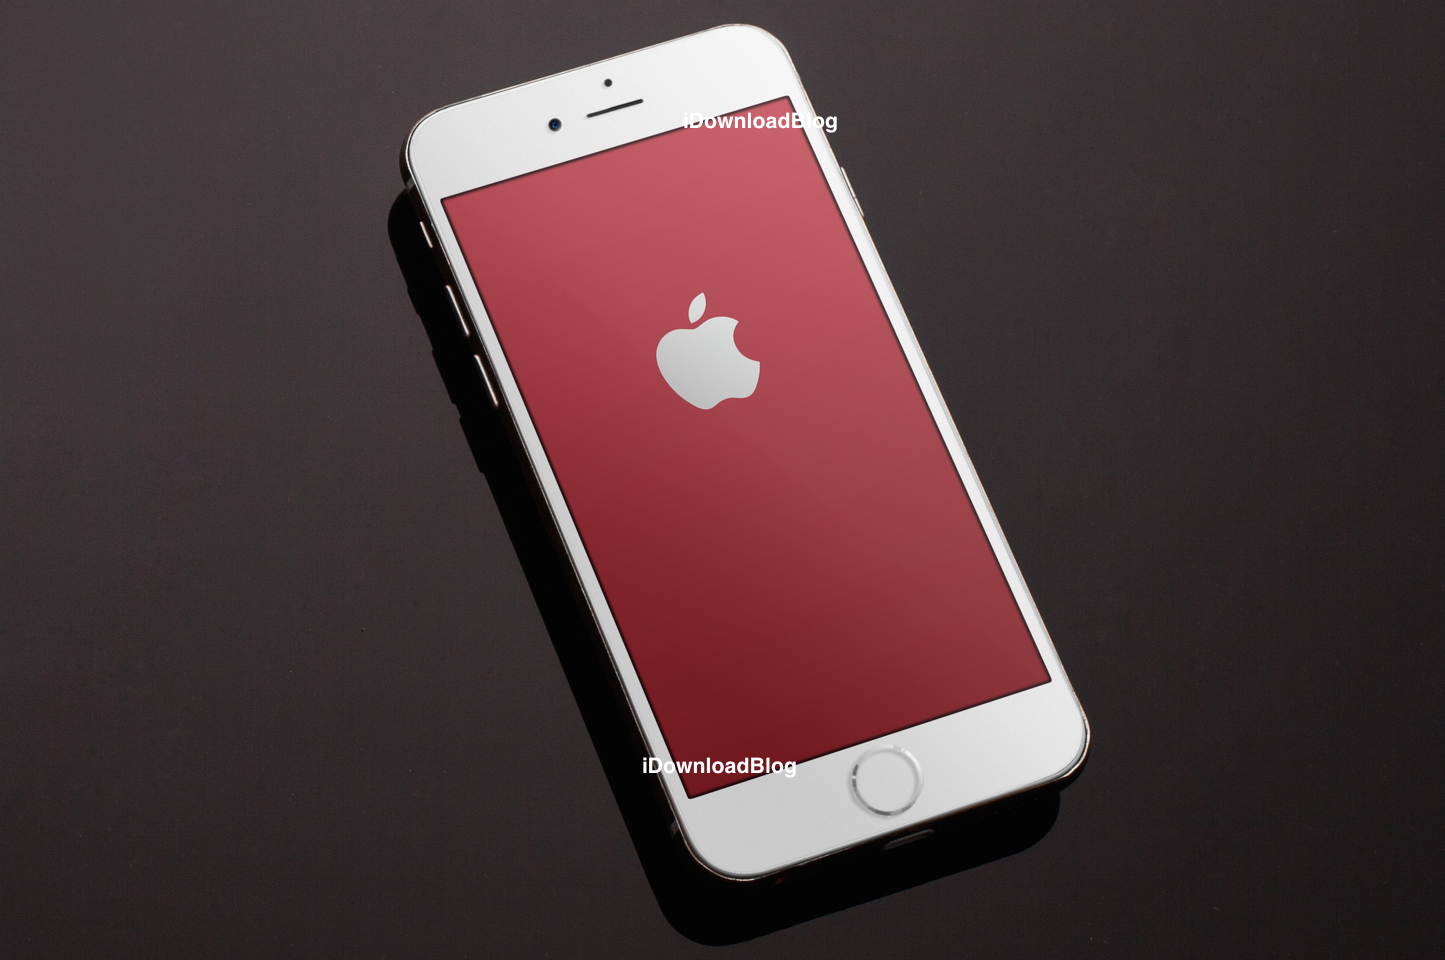 iPhone 7 (PRODUCT)RED-inspired wallpapers